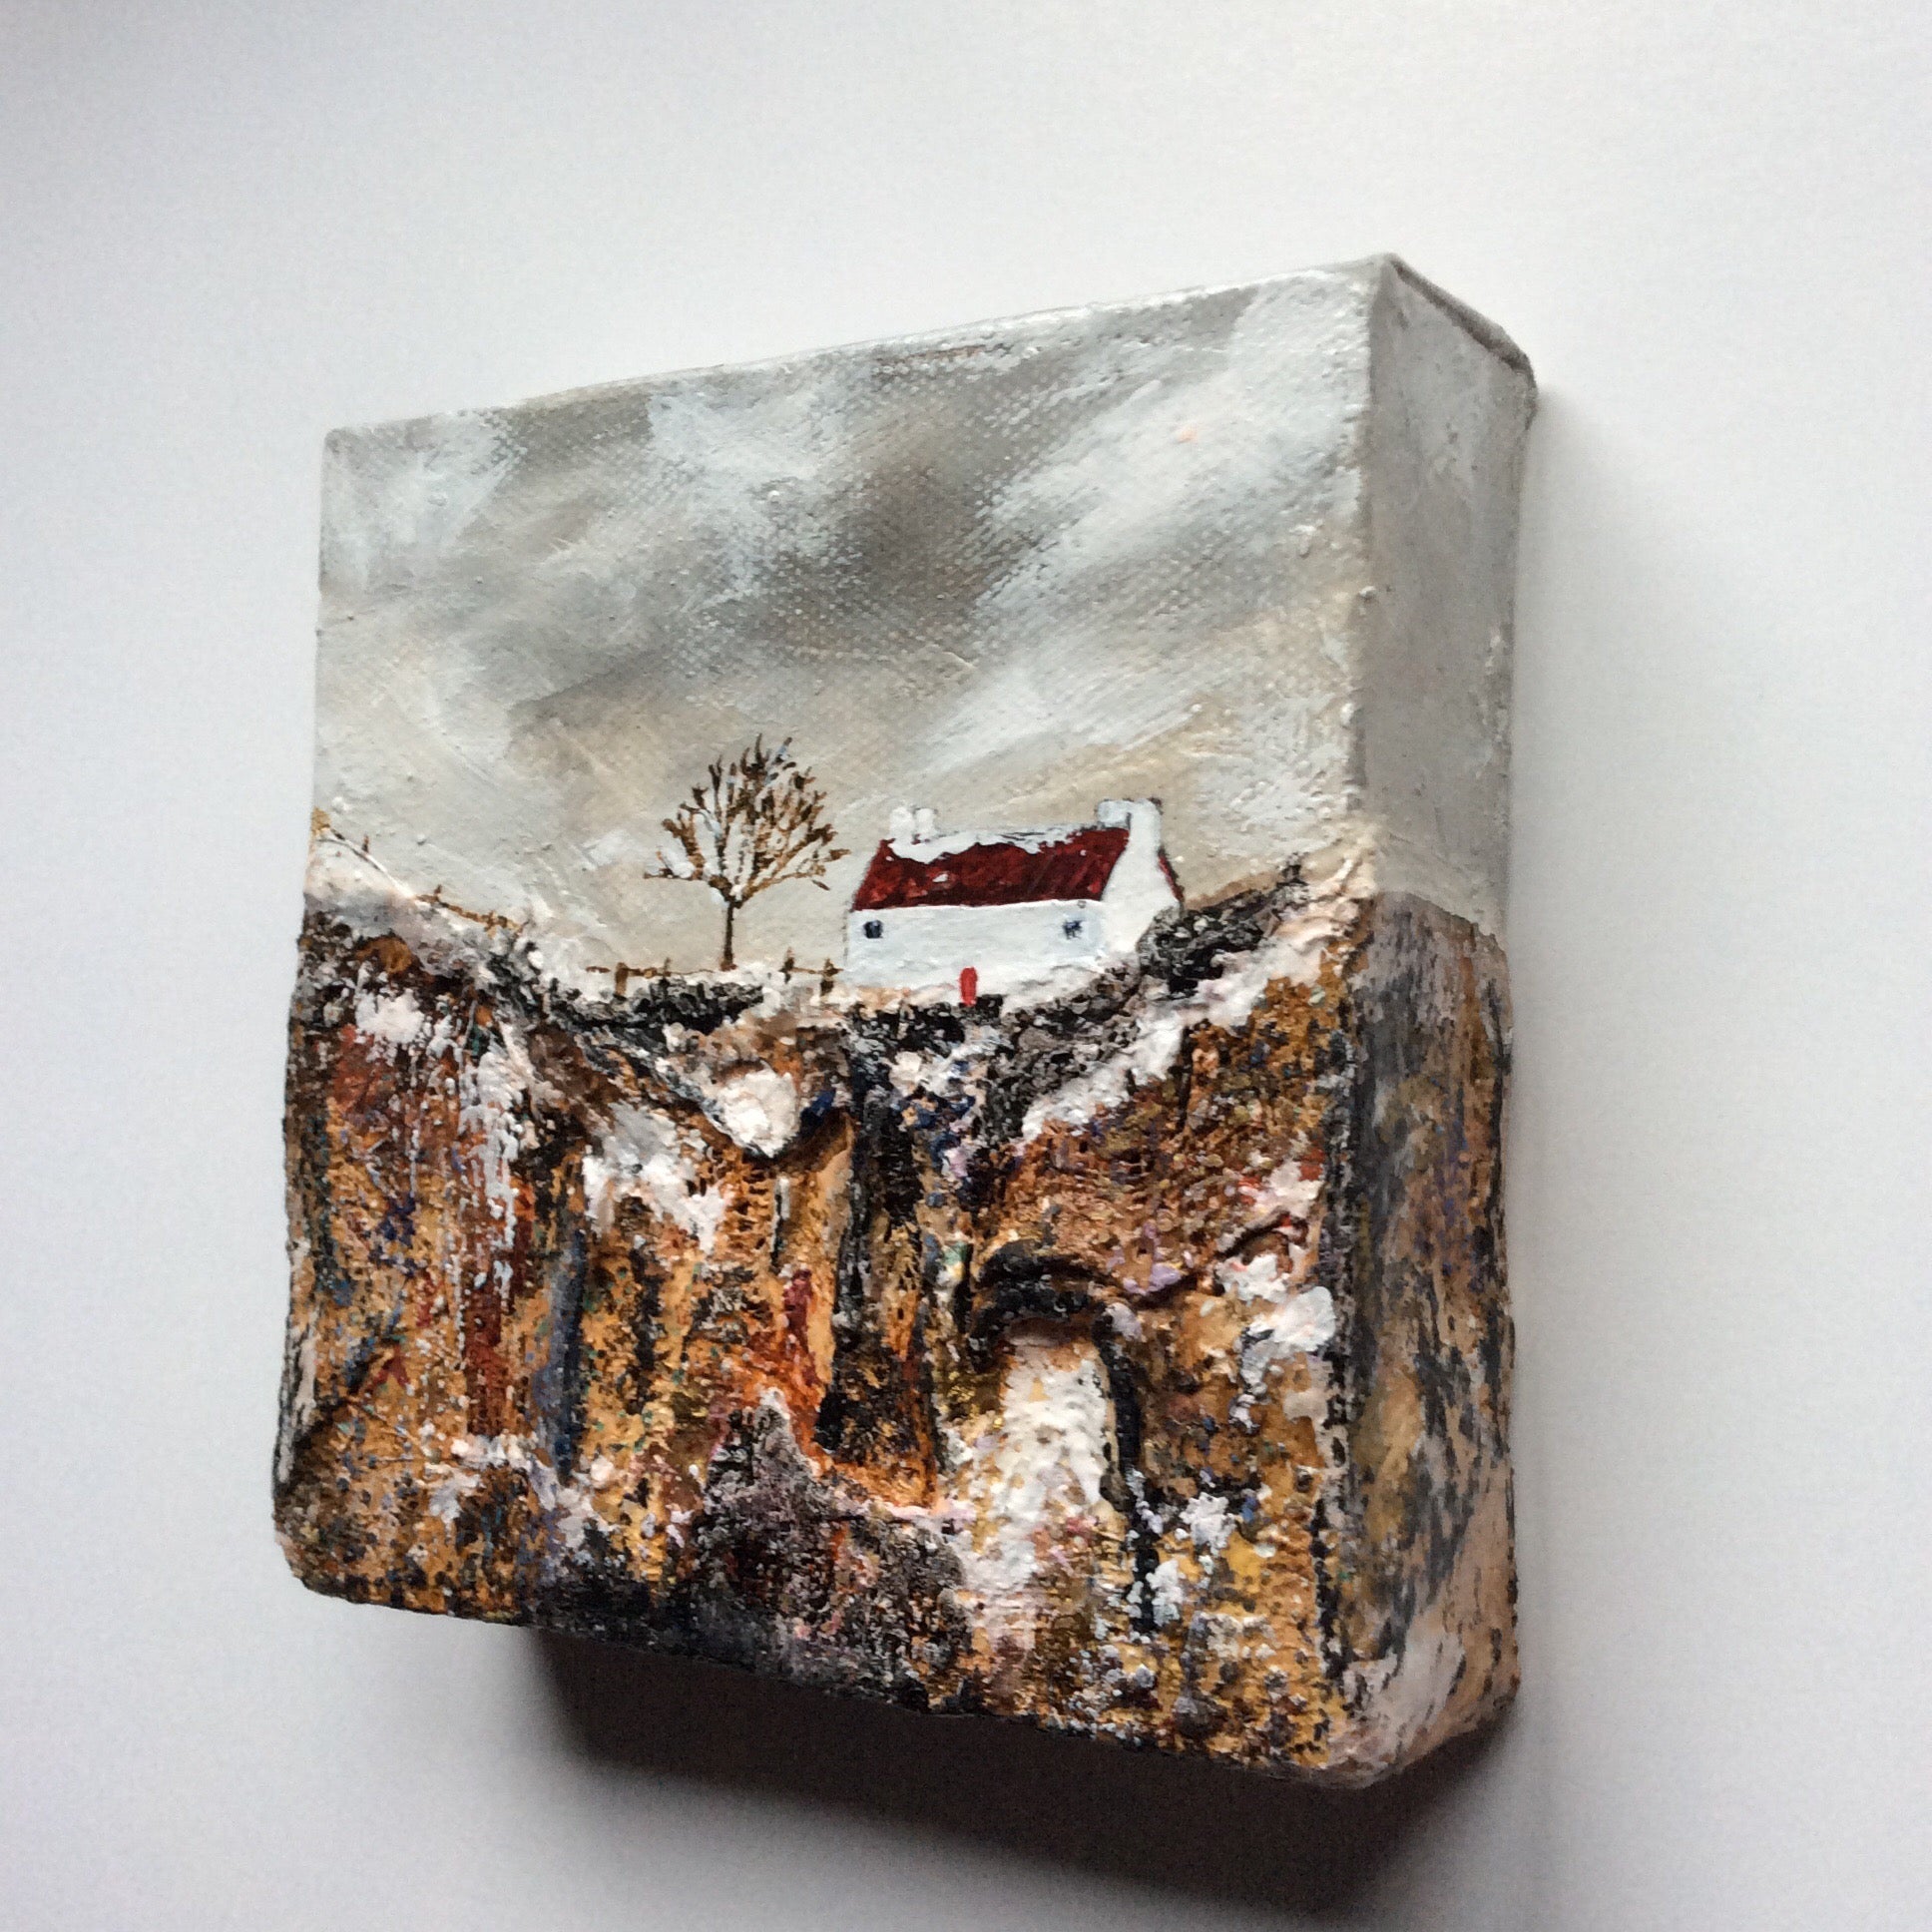 Mixed Media Art By Louise O'Hara - "Another cold day at Clifftop Cottage”